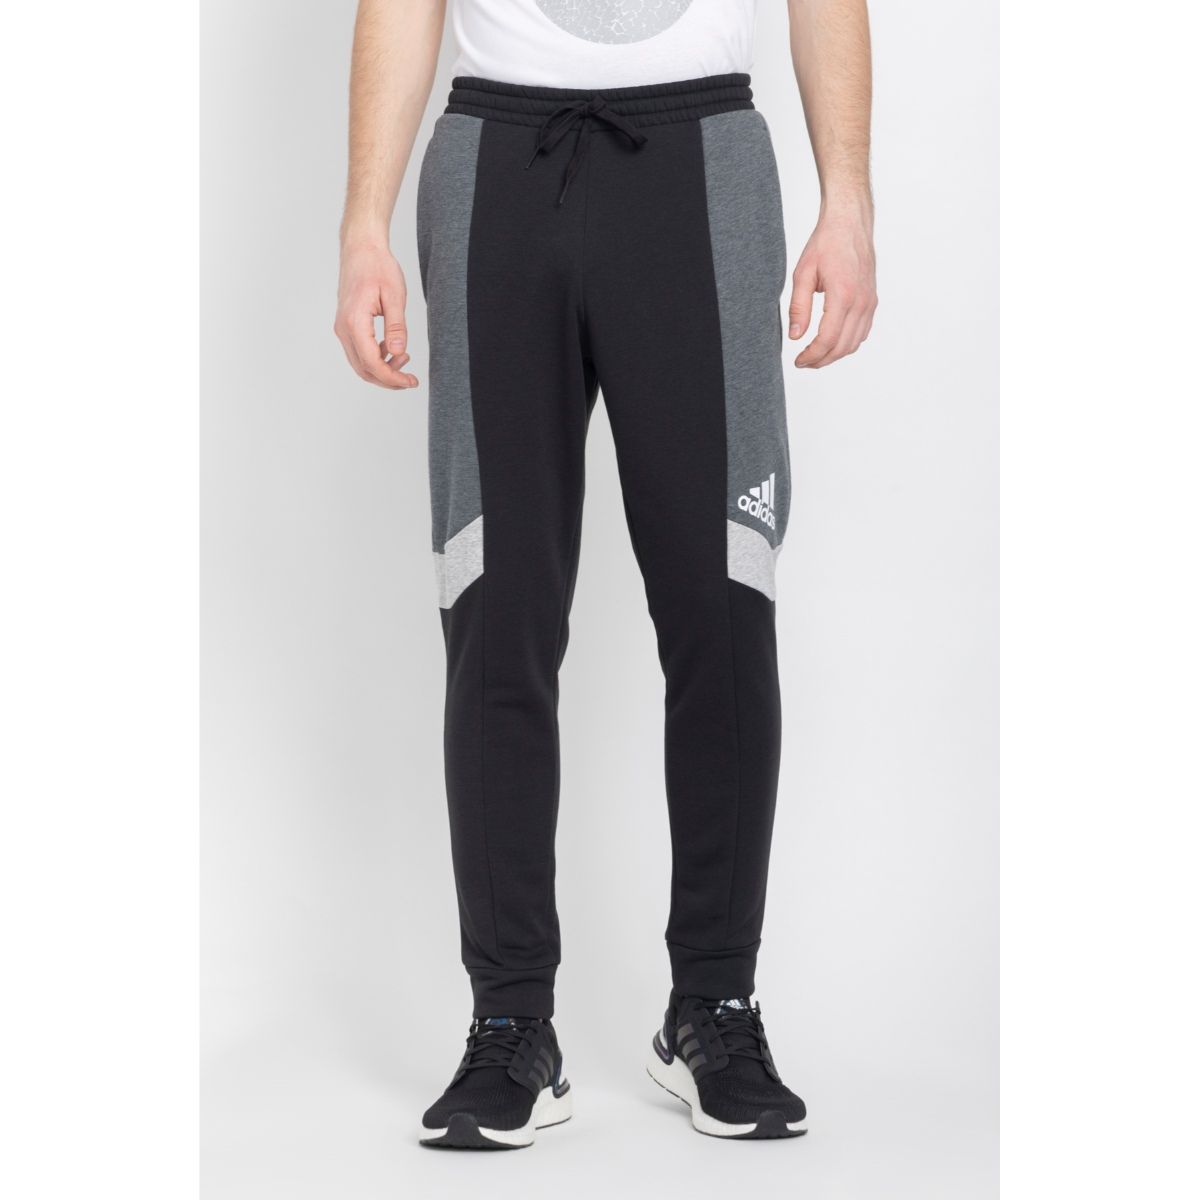 Buy adidas Joggers online  Men  83 products  FASHIOLAin